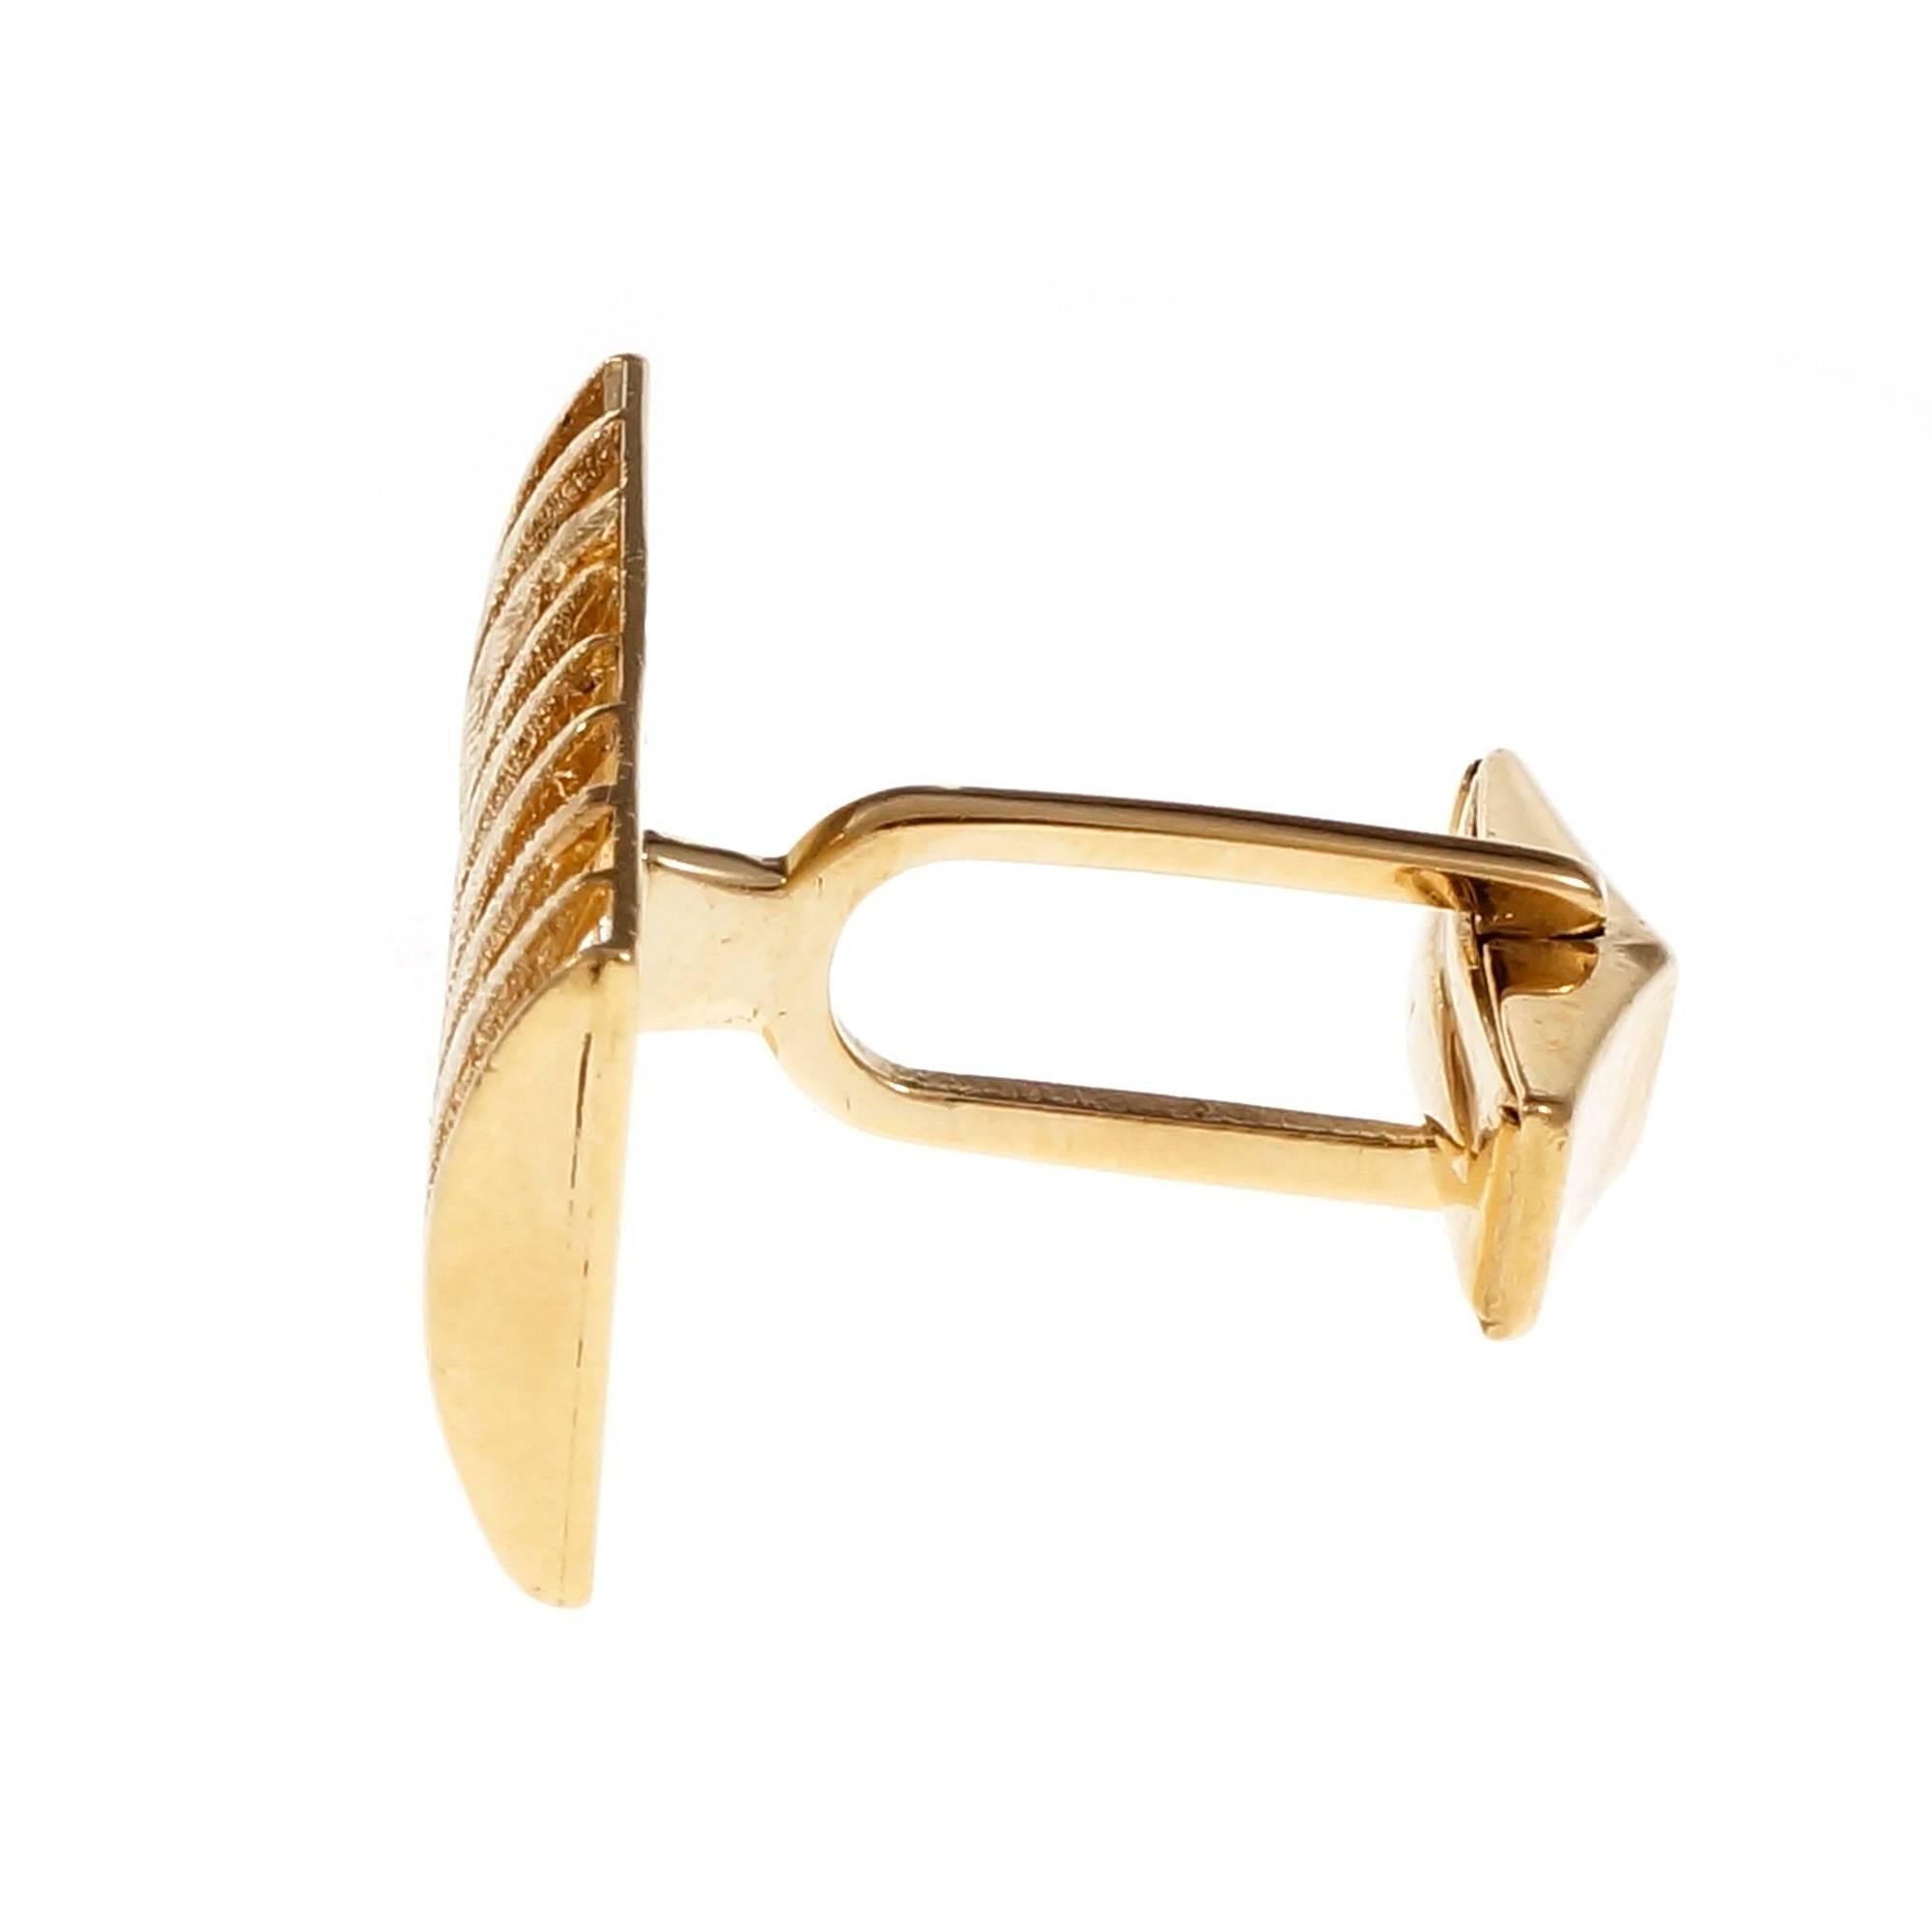 Gold Textured Rectangular Cufflinks In Good Condition For Sale In Stamford, CT